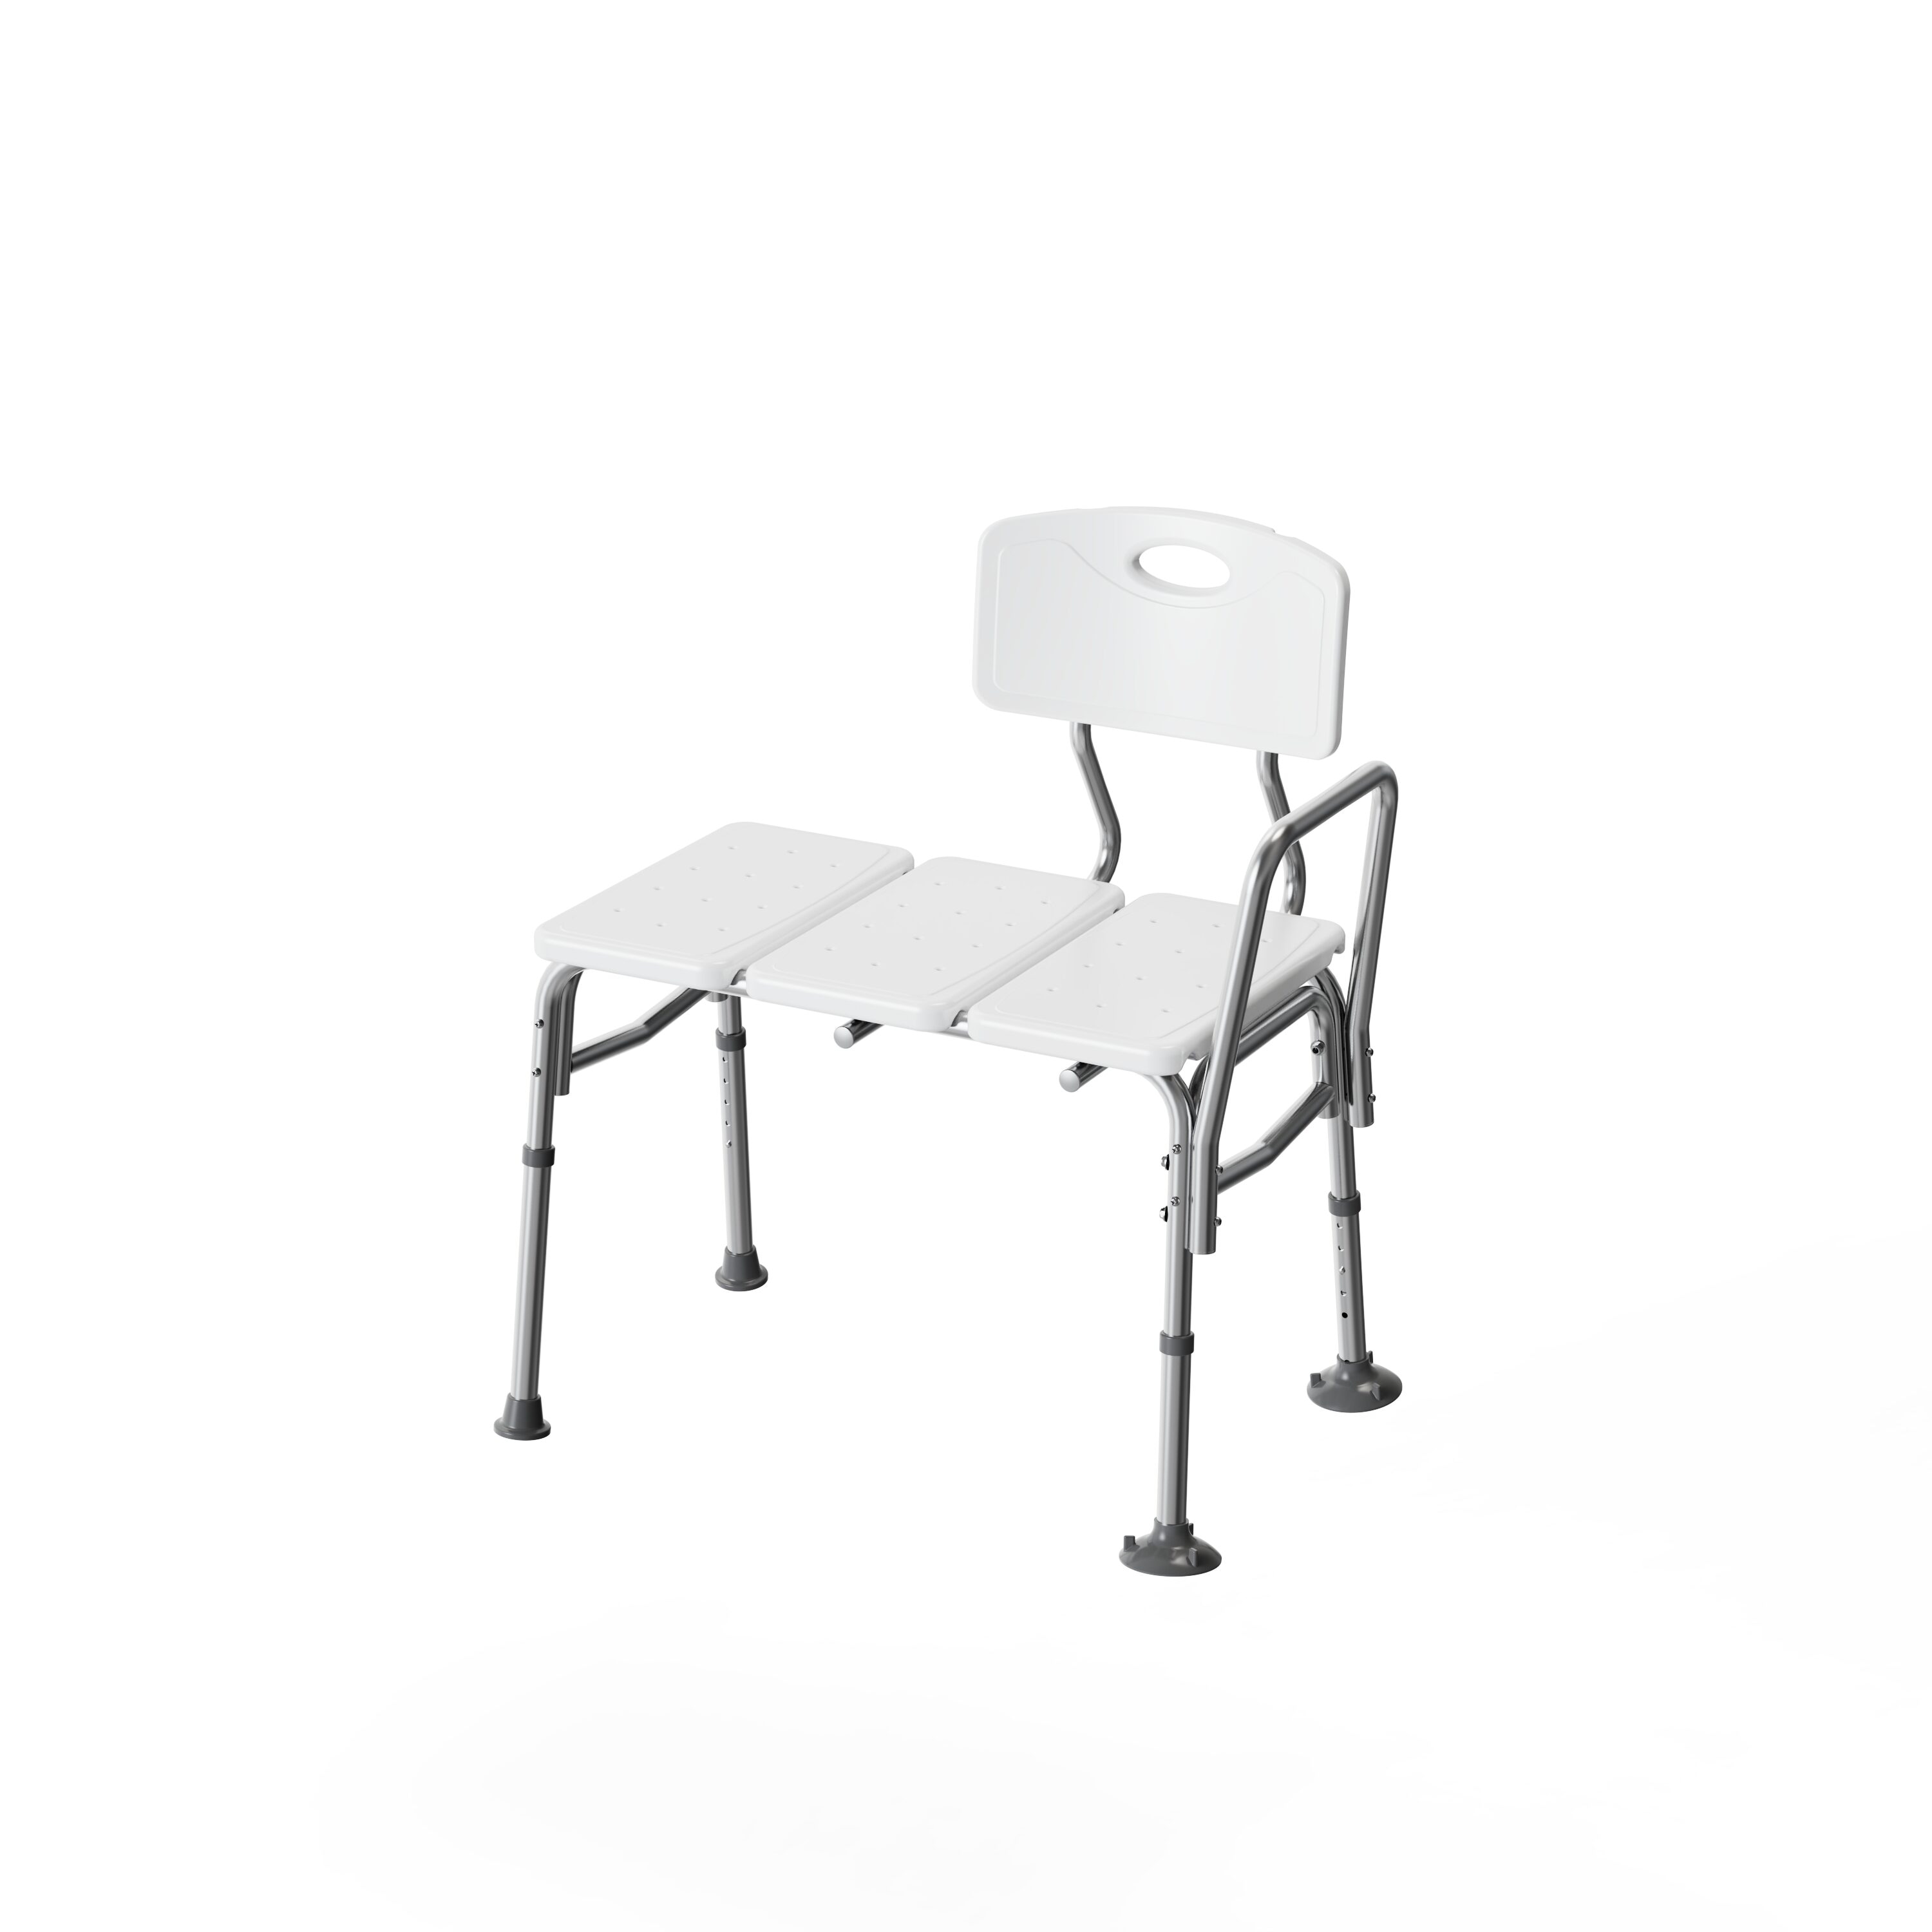 Project Source White Shower and Bath Stool in the Bathroom Safety